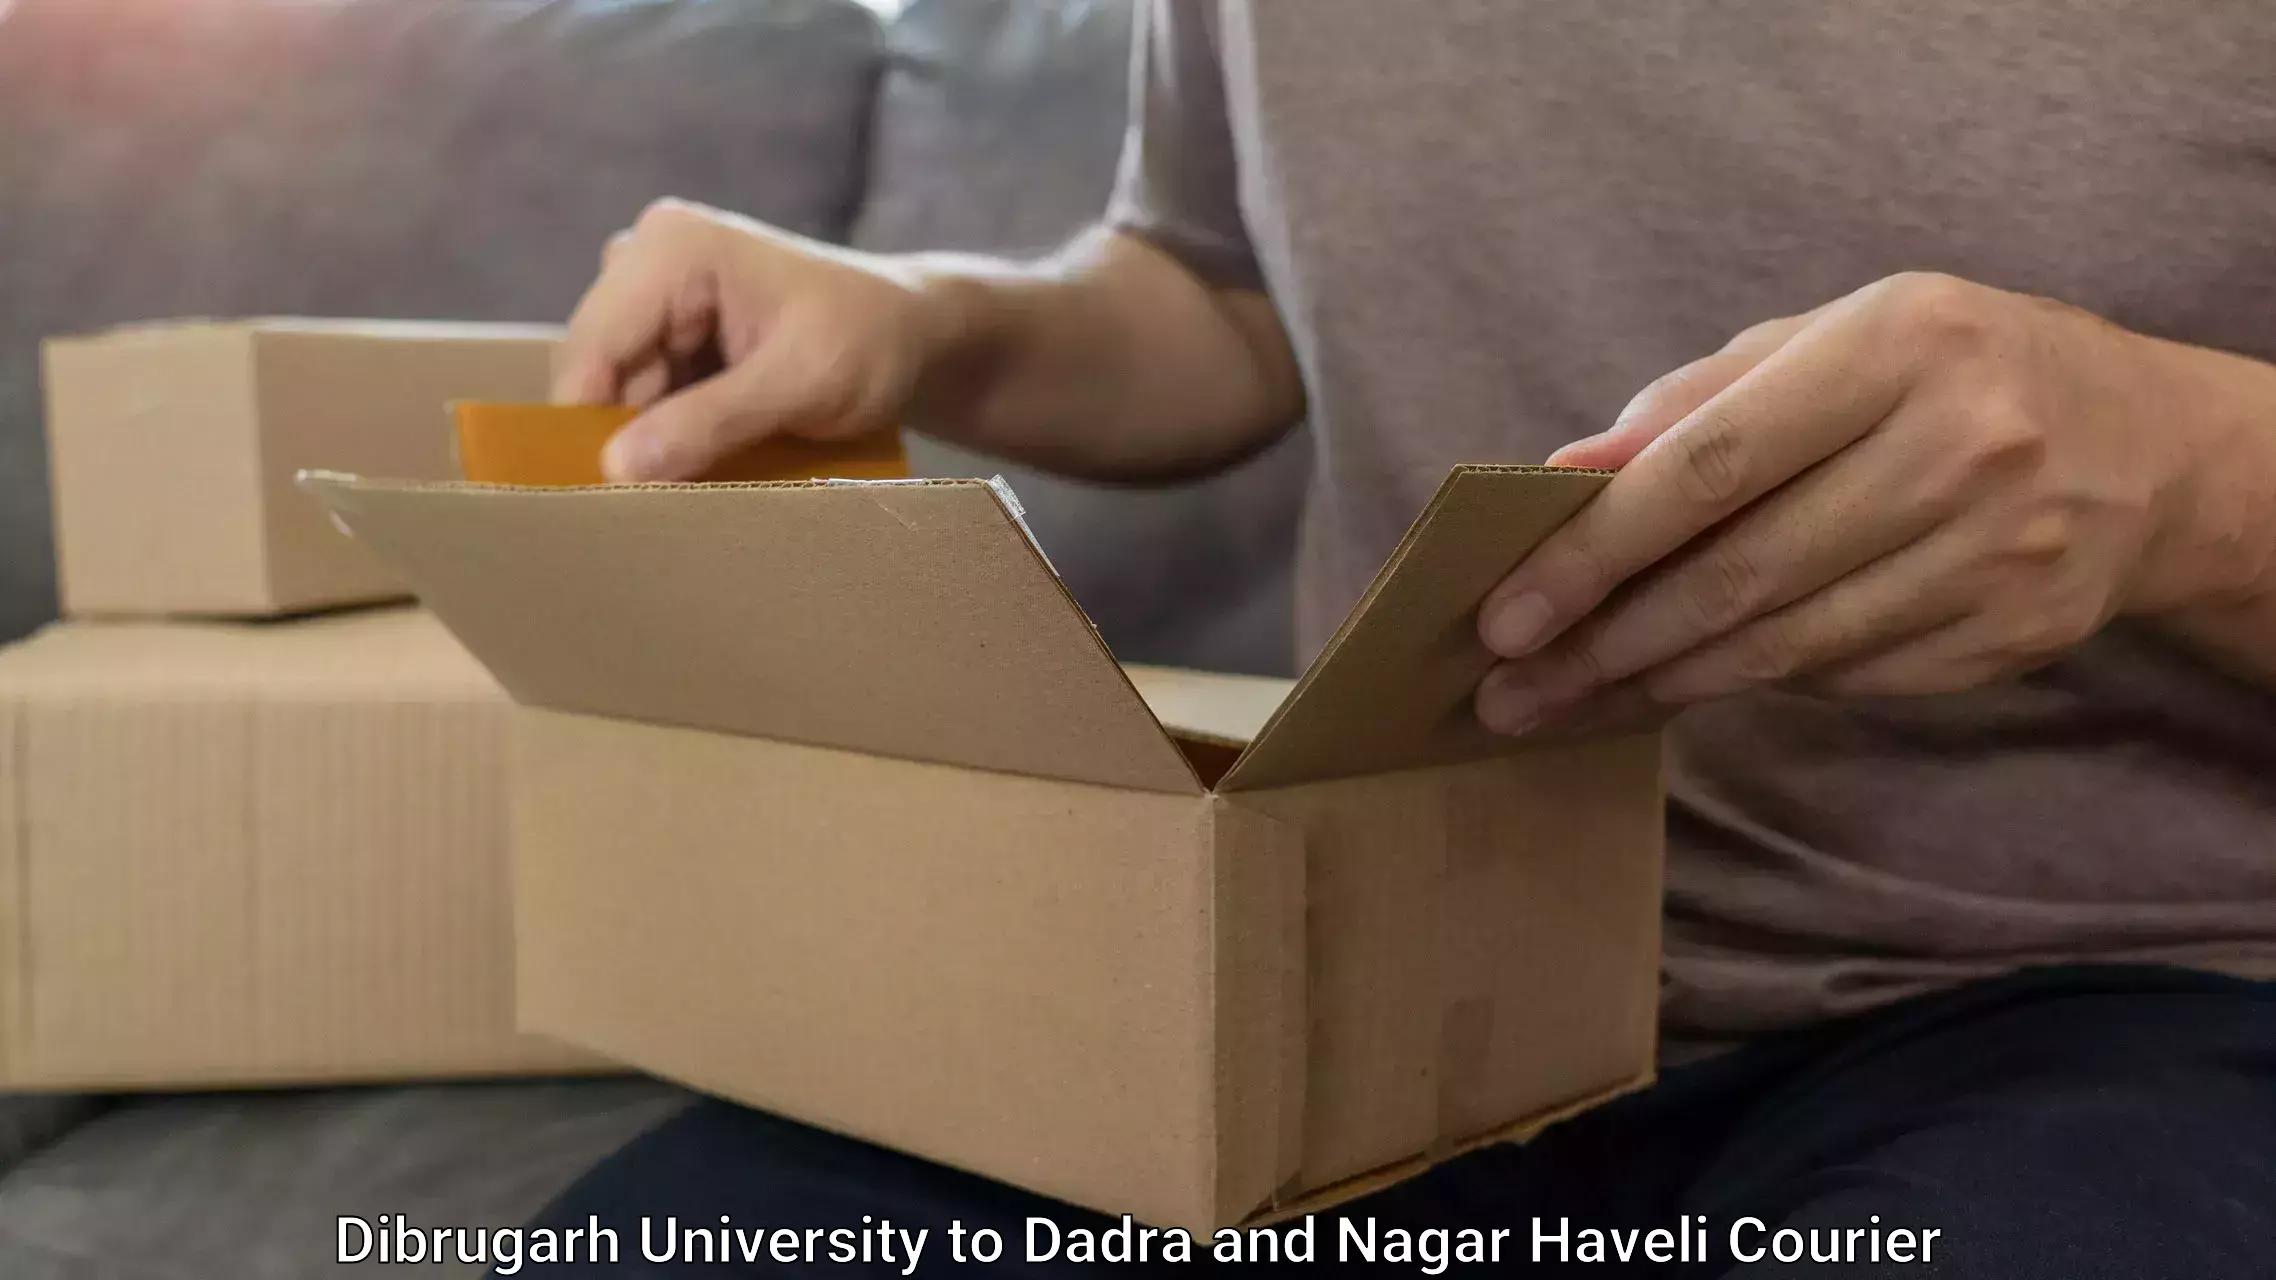 Luggage storage and delivery Dibrugarh University to Dadra and Nagar Haveli